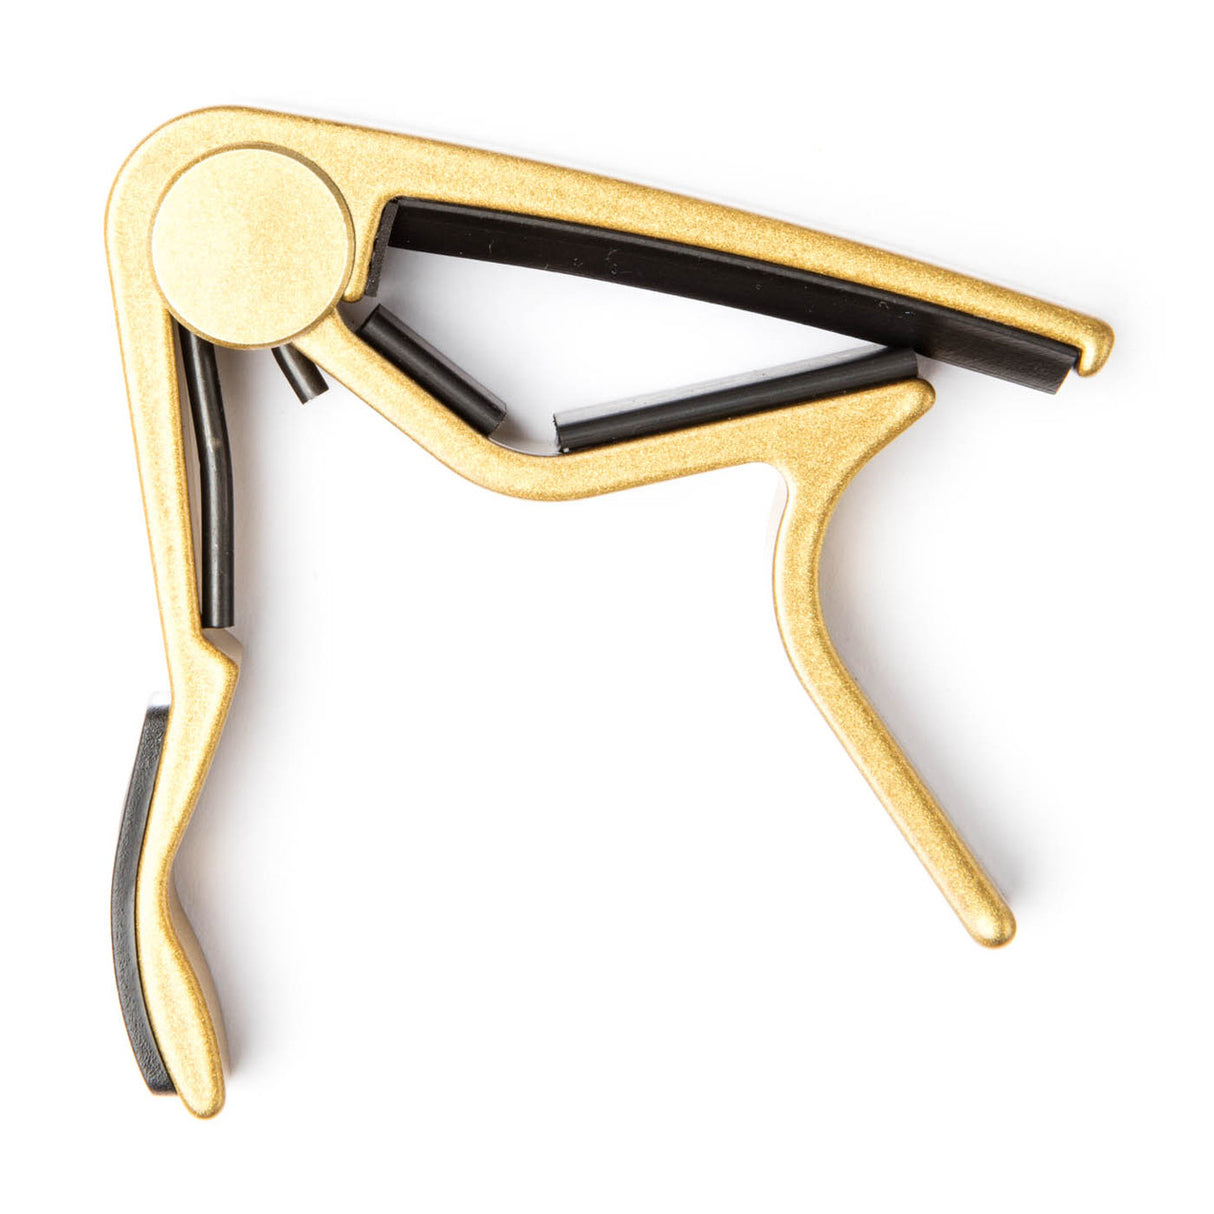 Dunlop Trigger Capo Acoustic Curved - Gold